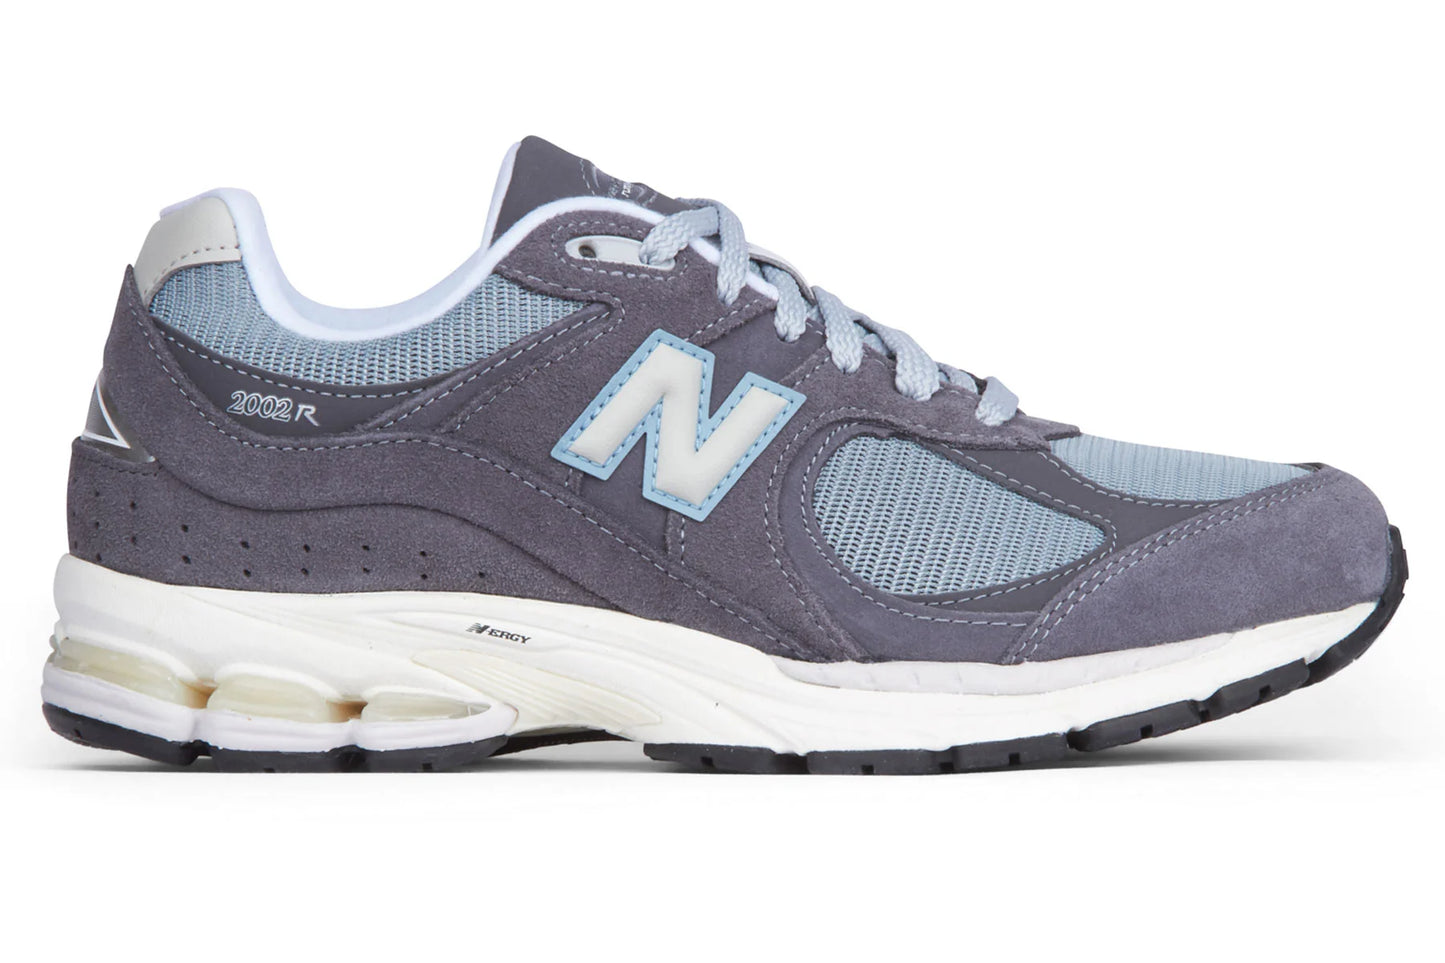 NEW BALANCE - 2002R "Steel Blue" - THE GAME